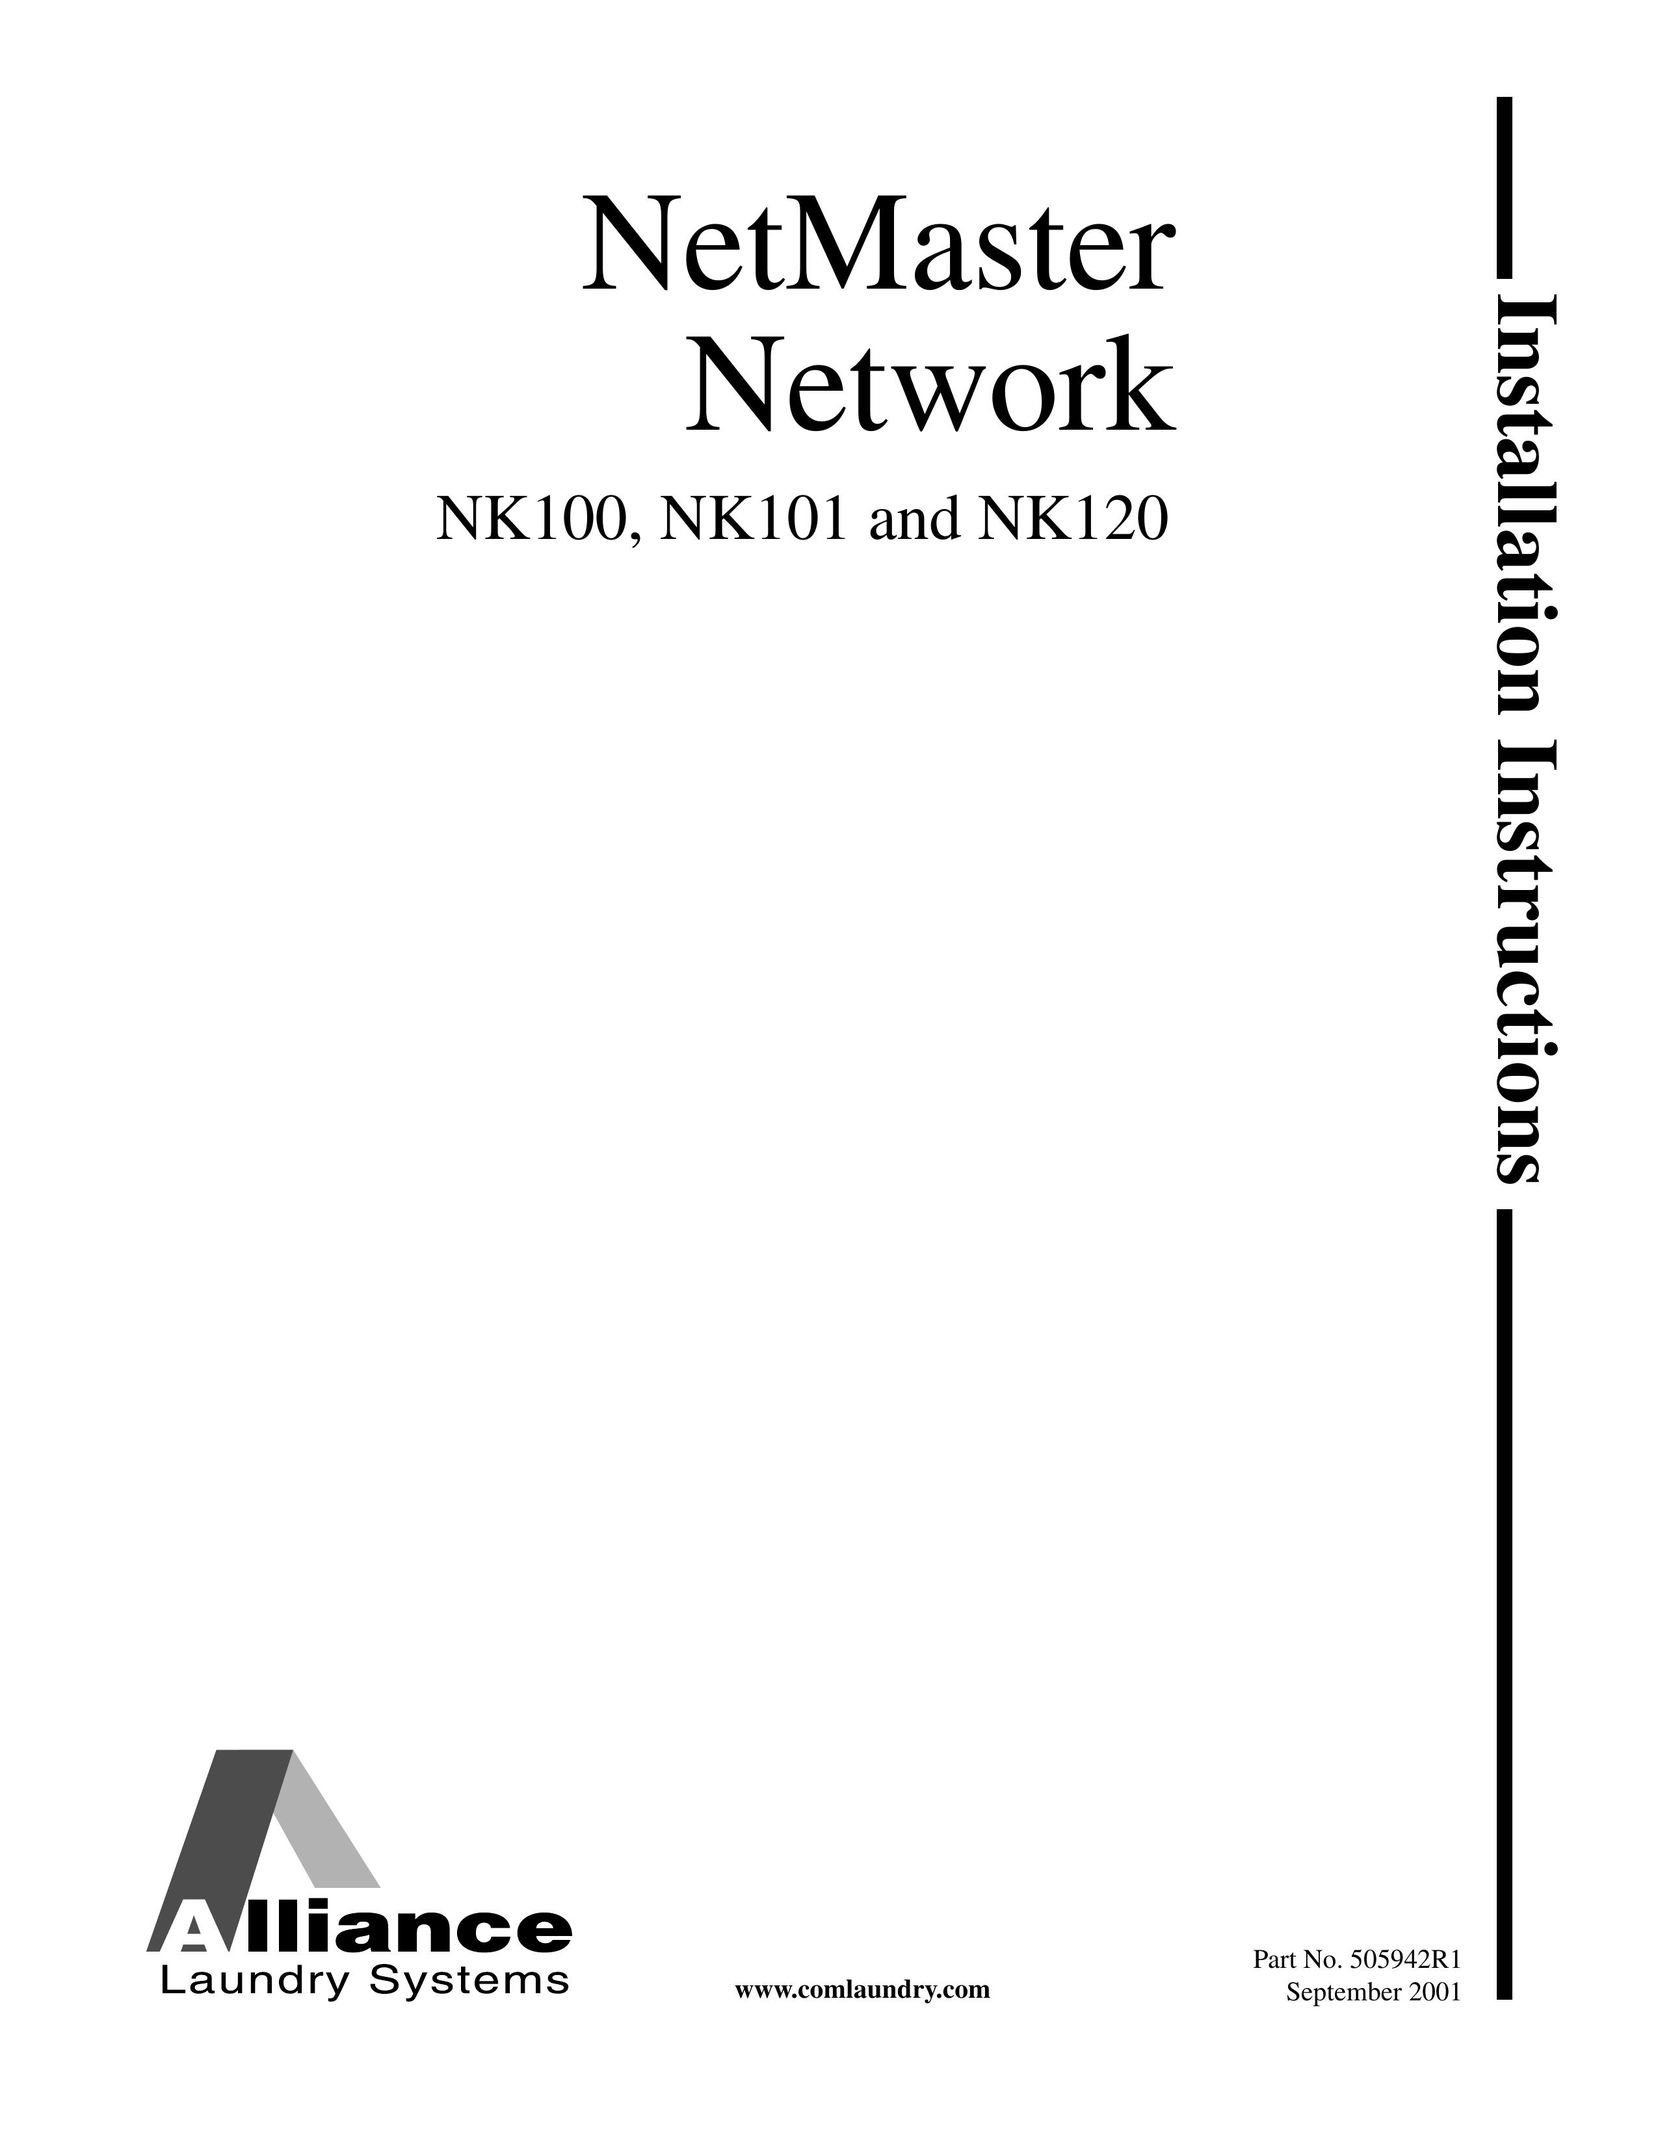 Alliance Laundry Systems NK101 Network Hardware User Manual